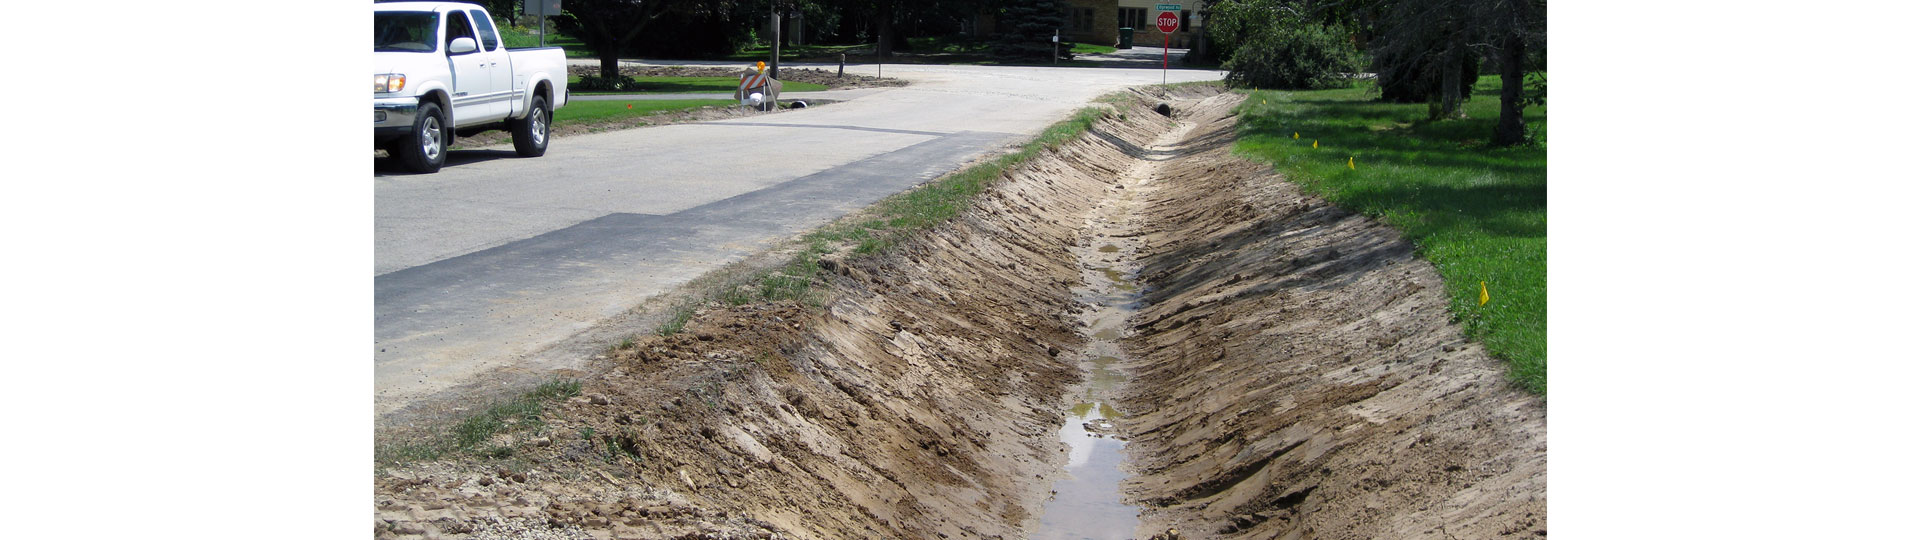 Nunda Road District Completed Ditch Work